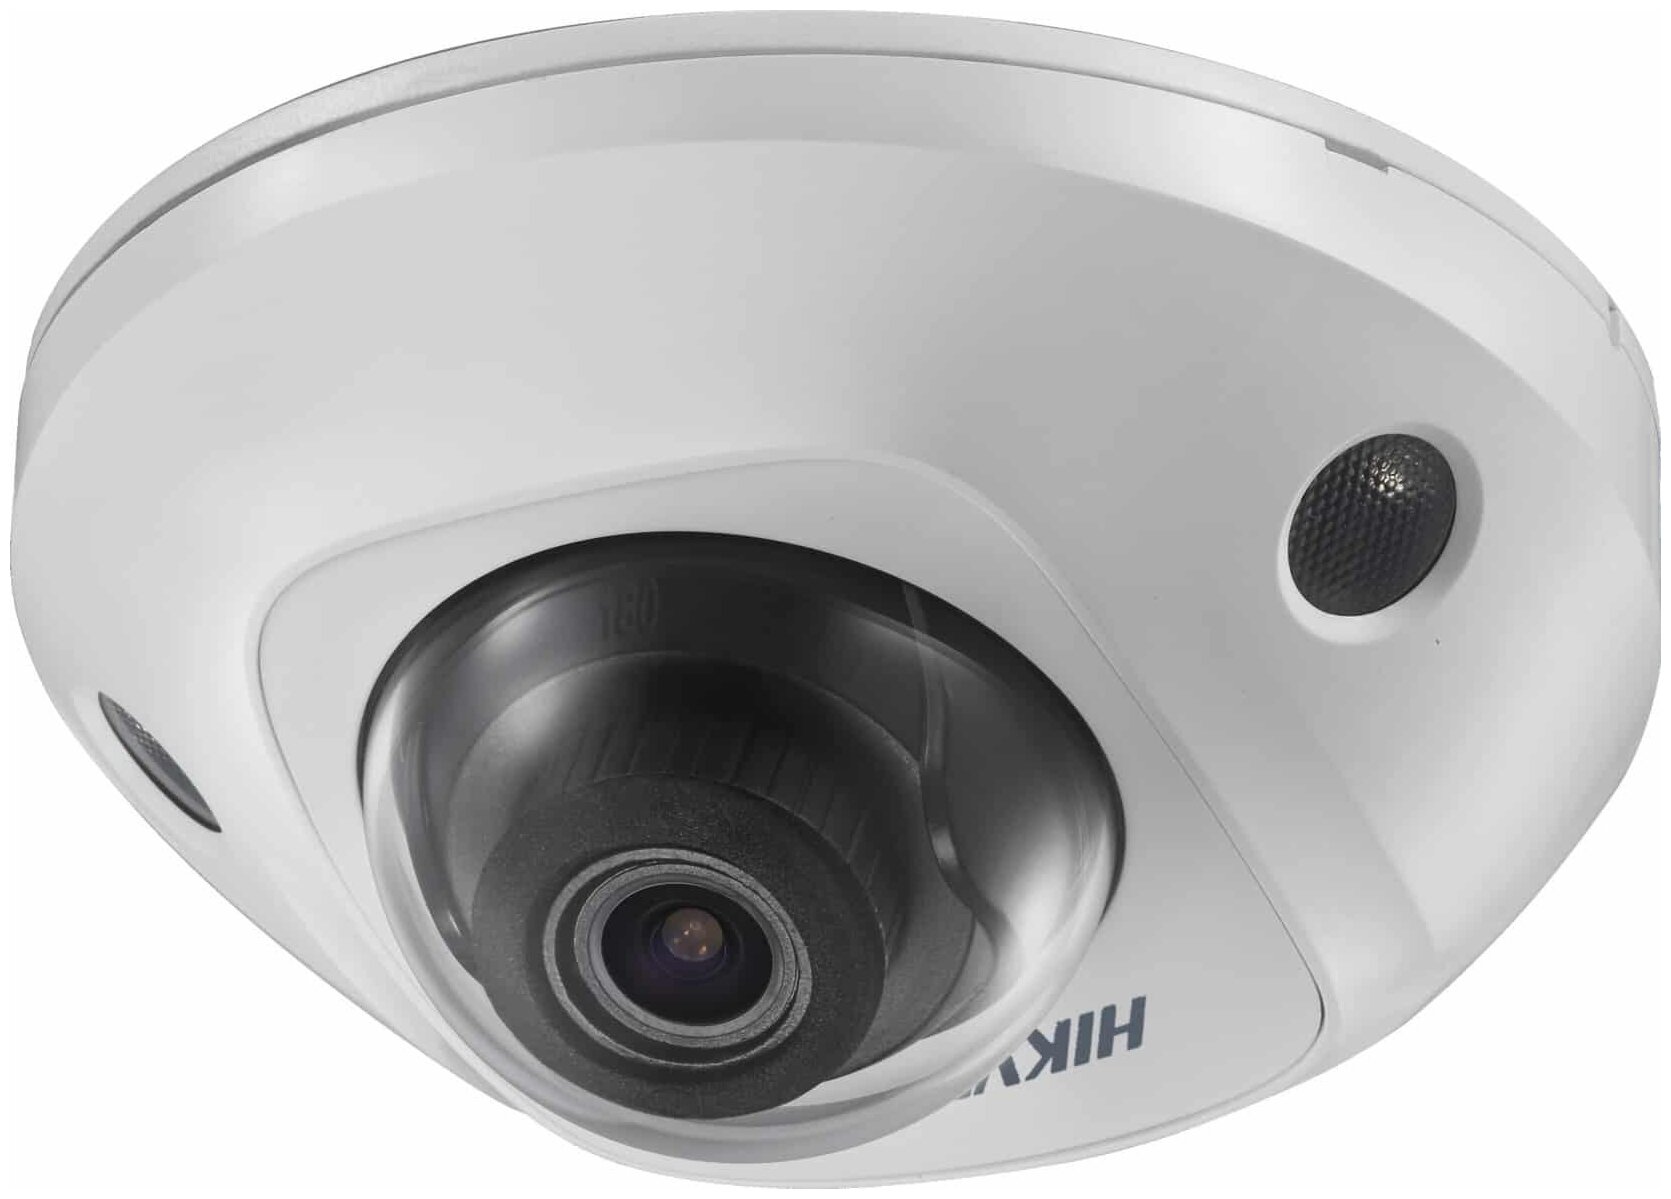 IP-камера Hikvision DS-2CD2563G0-IS (2.8 мм)